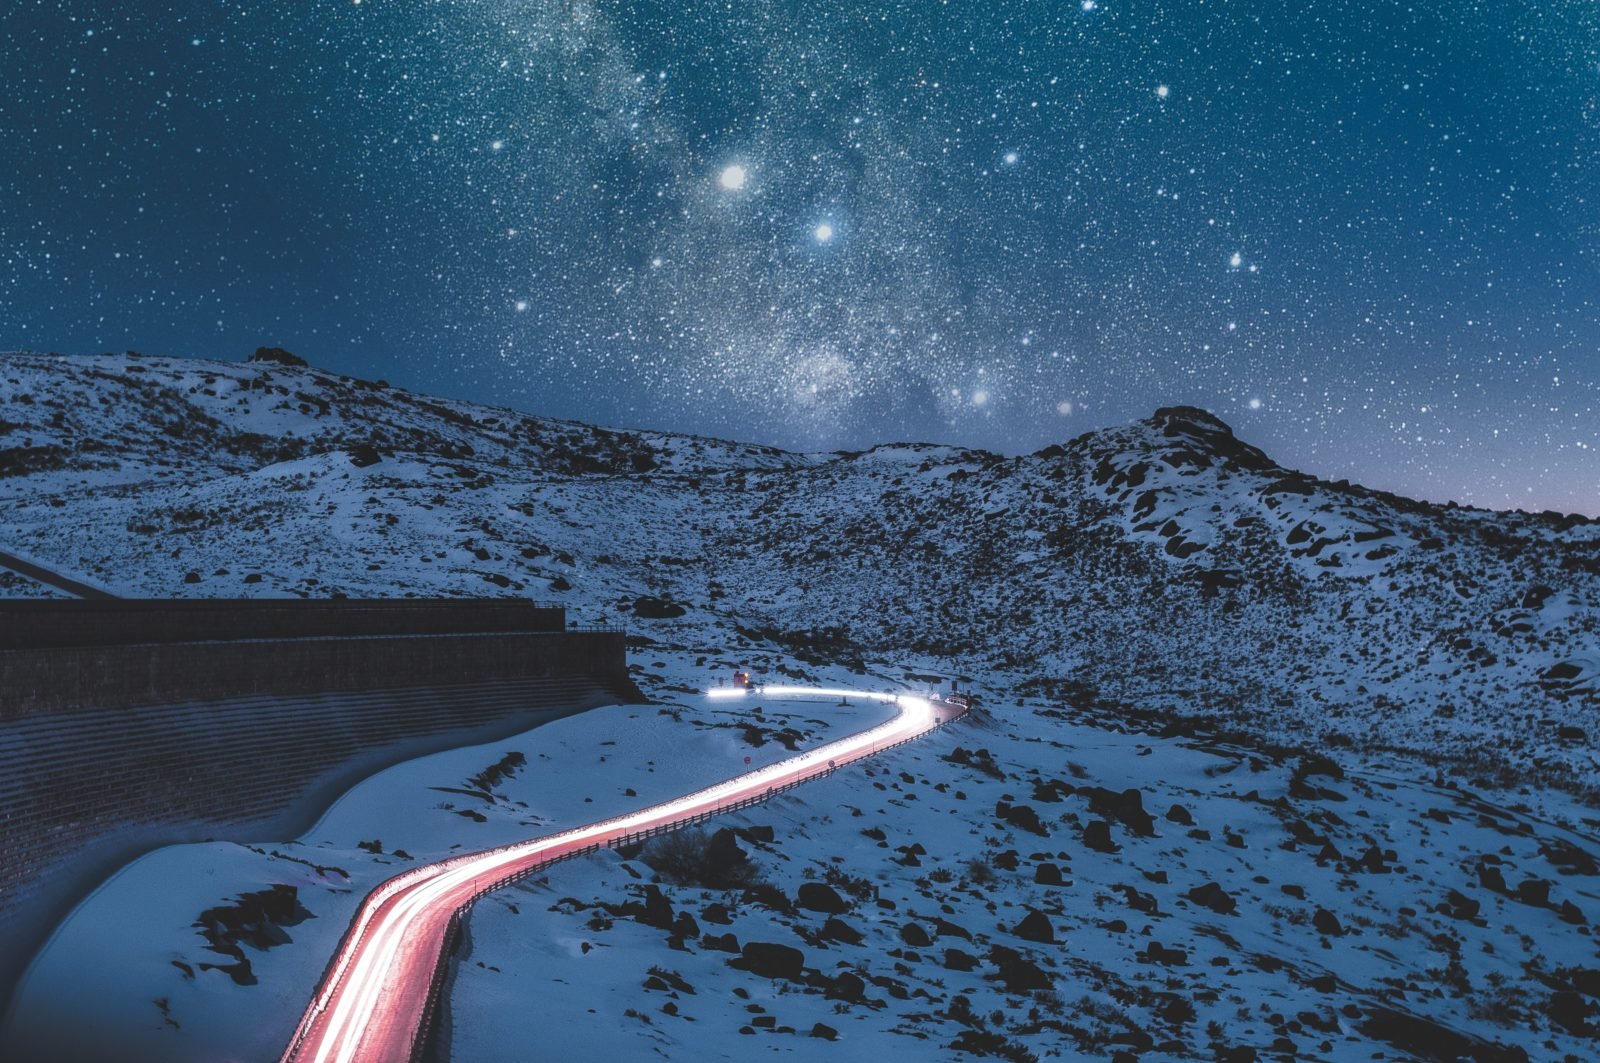 A lighted road in a snow covered desert landscape